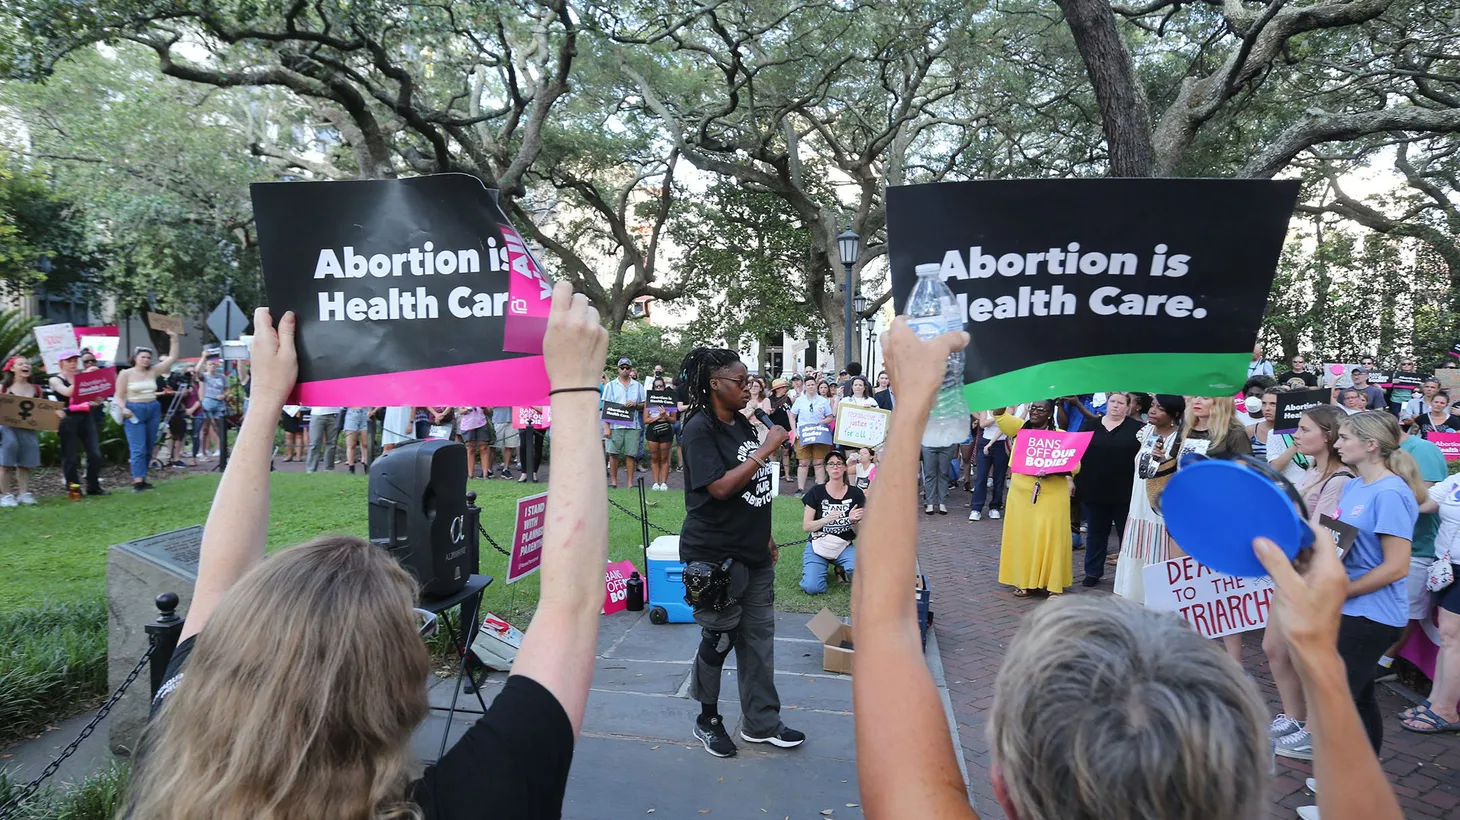 A crowd rallies for abortion rights following the Supreme Court ruling overturning Roe v. Wade, in Johnson Square in Savannah, Georgia, on June 24, 2022.